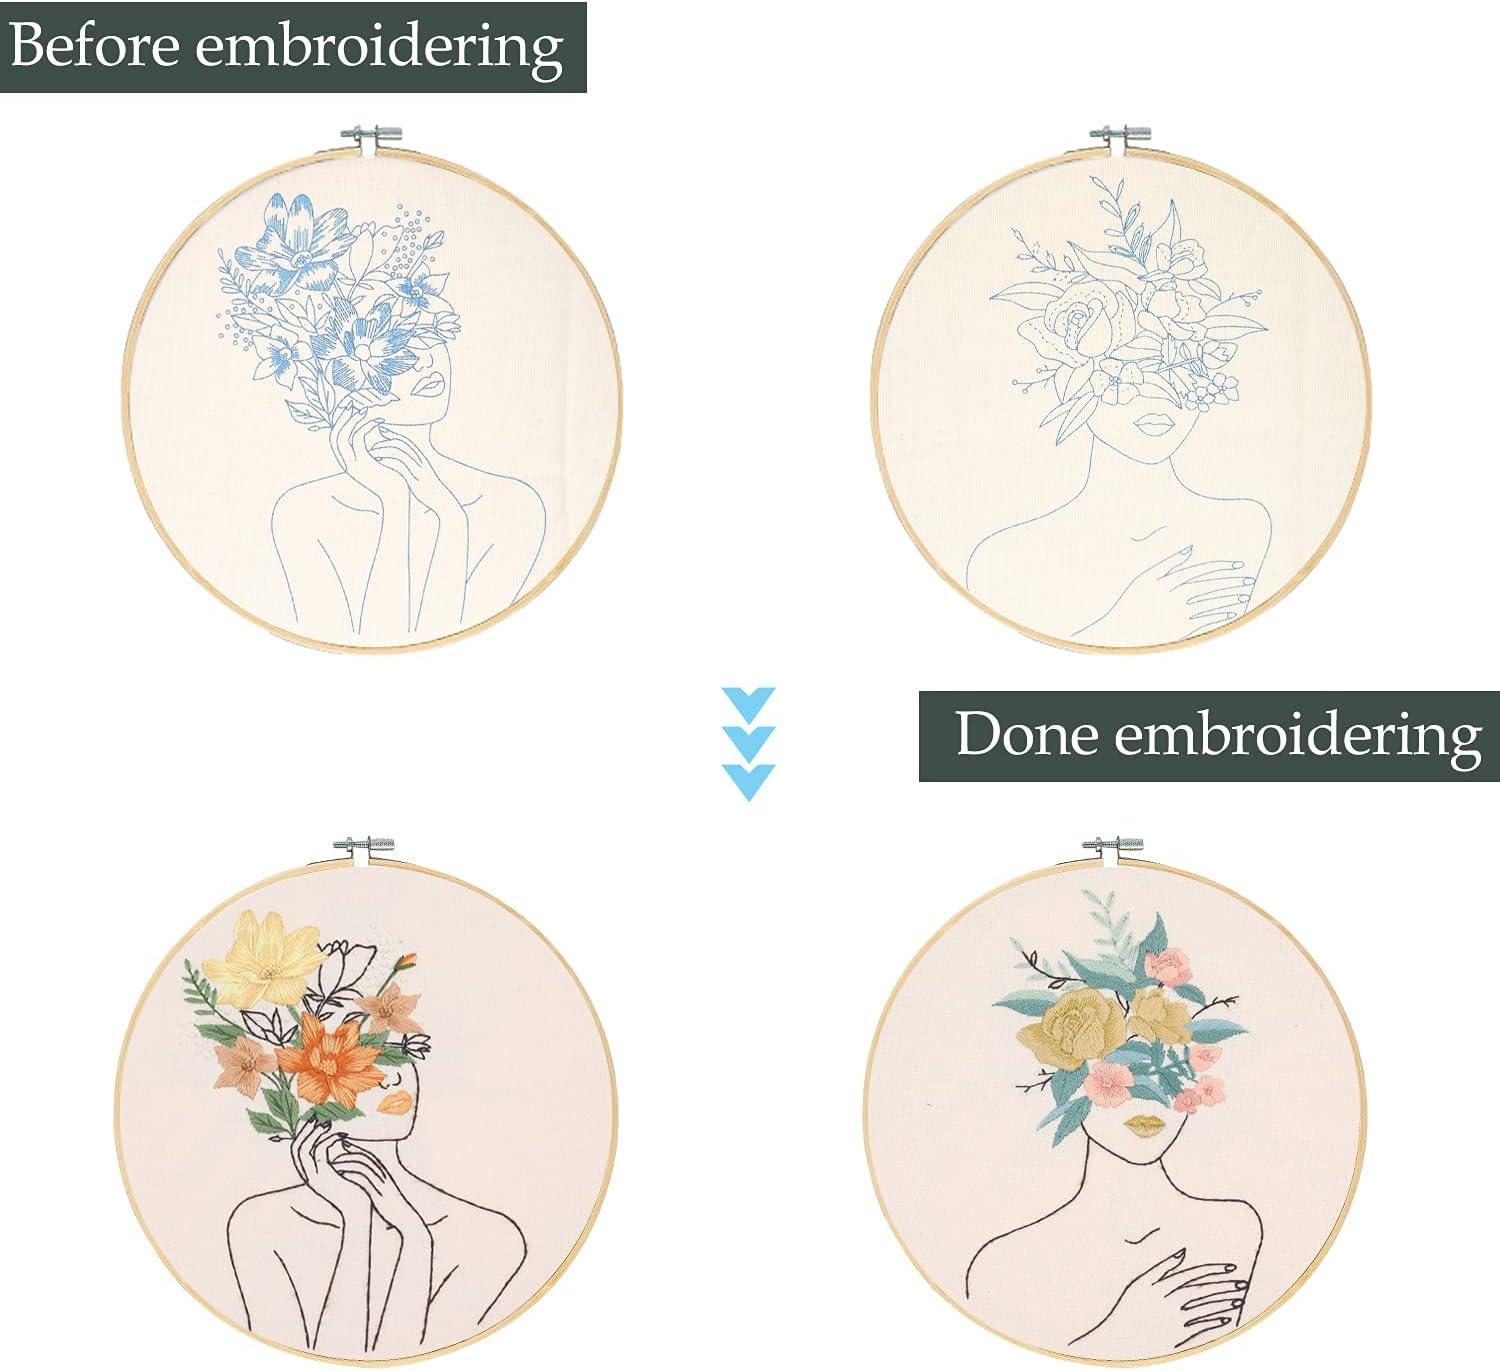 Santune 4 Pack Embroidery kit with Patterns and Instructions DIY Beginner  Cross Stitch Kits for Adults with 4 Embroidery Clothes Women and Flower  Pattern 2 Embroidery Hoops Color Threads and Needles A-Women